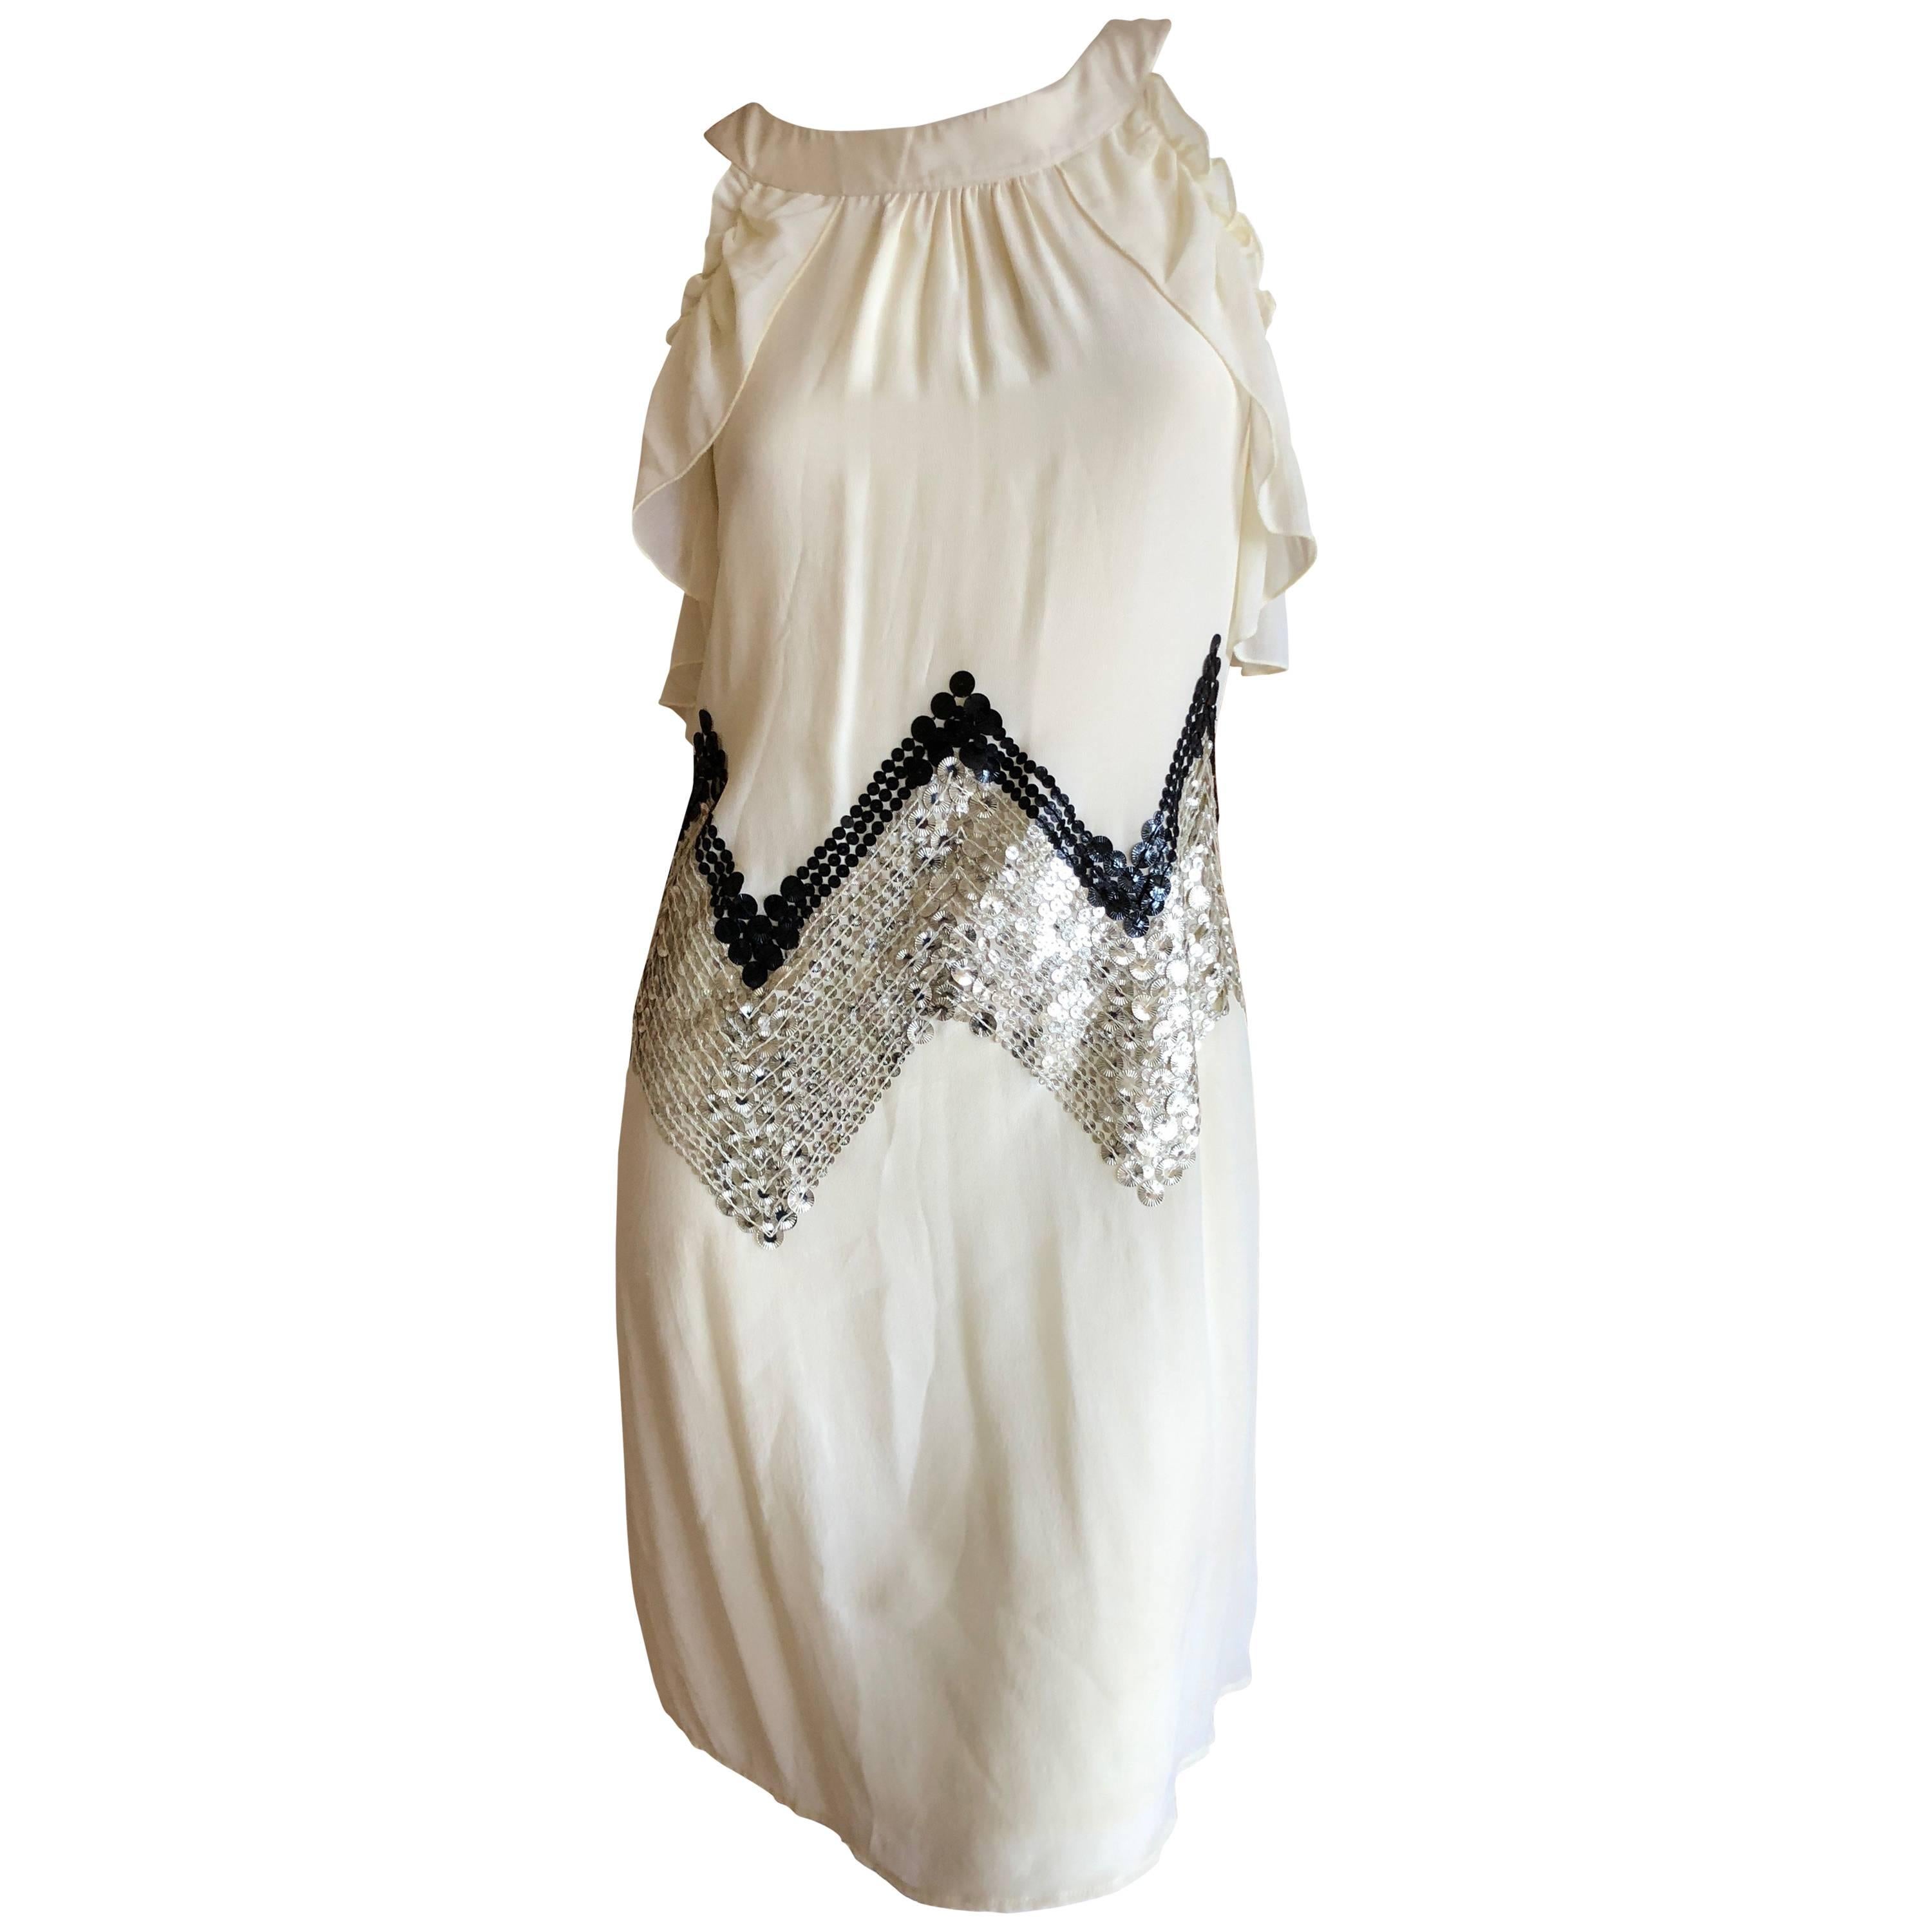 John Galliano Vintage Embellished Chevron Pattern Sequin Dress New With Tags For Sale